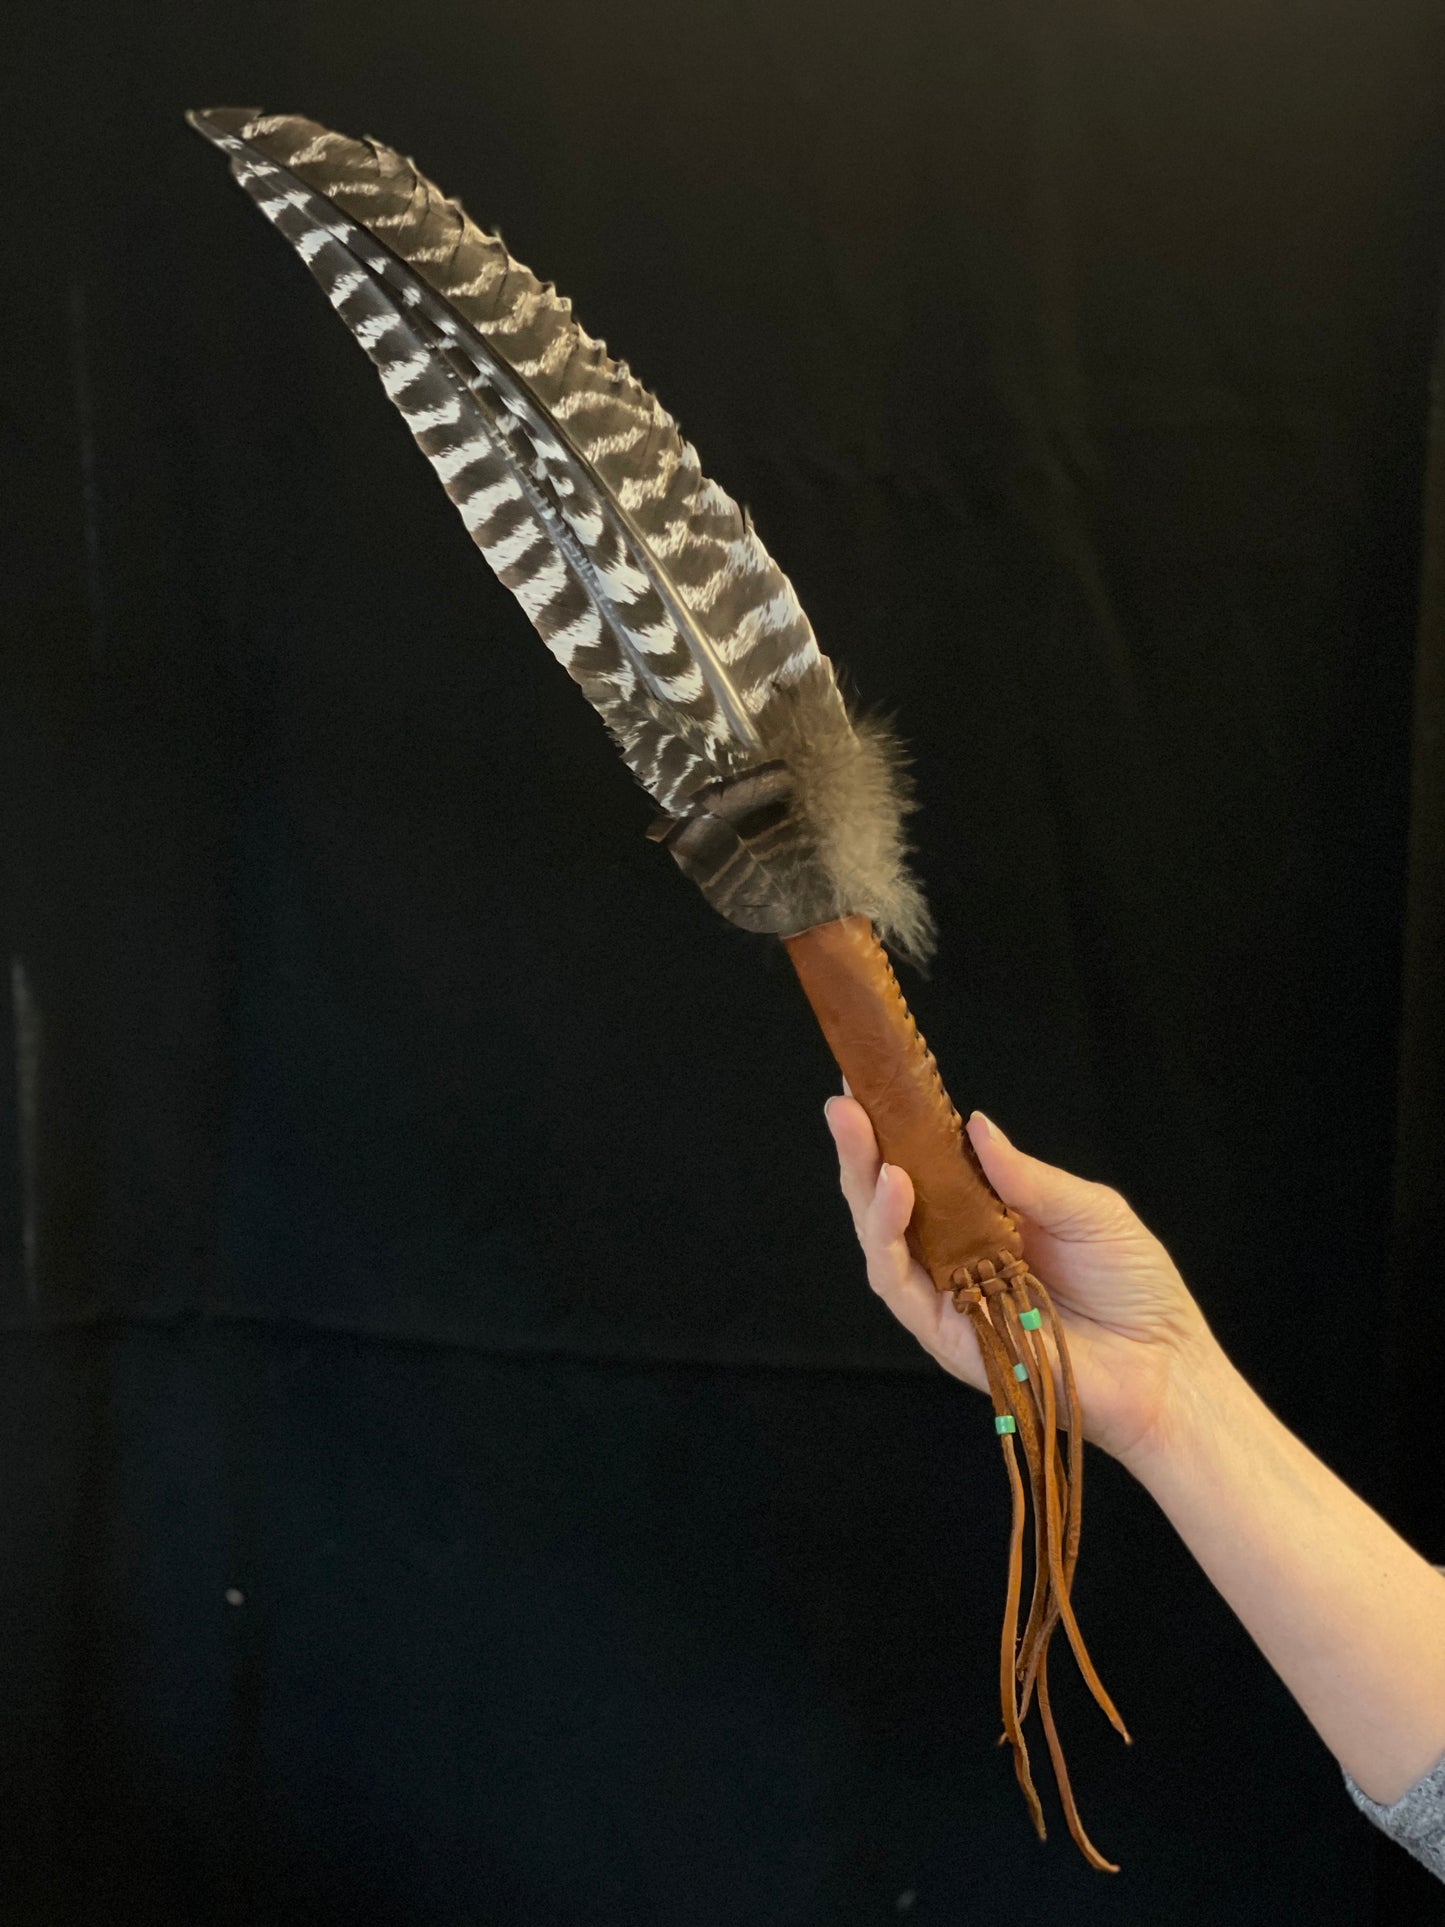 Hand crafted feather fan for ritual work, smudging, smoke clearing and healing; beautiful Turkey wing feathers, leather, glass beads